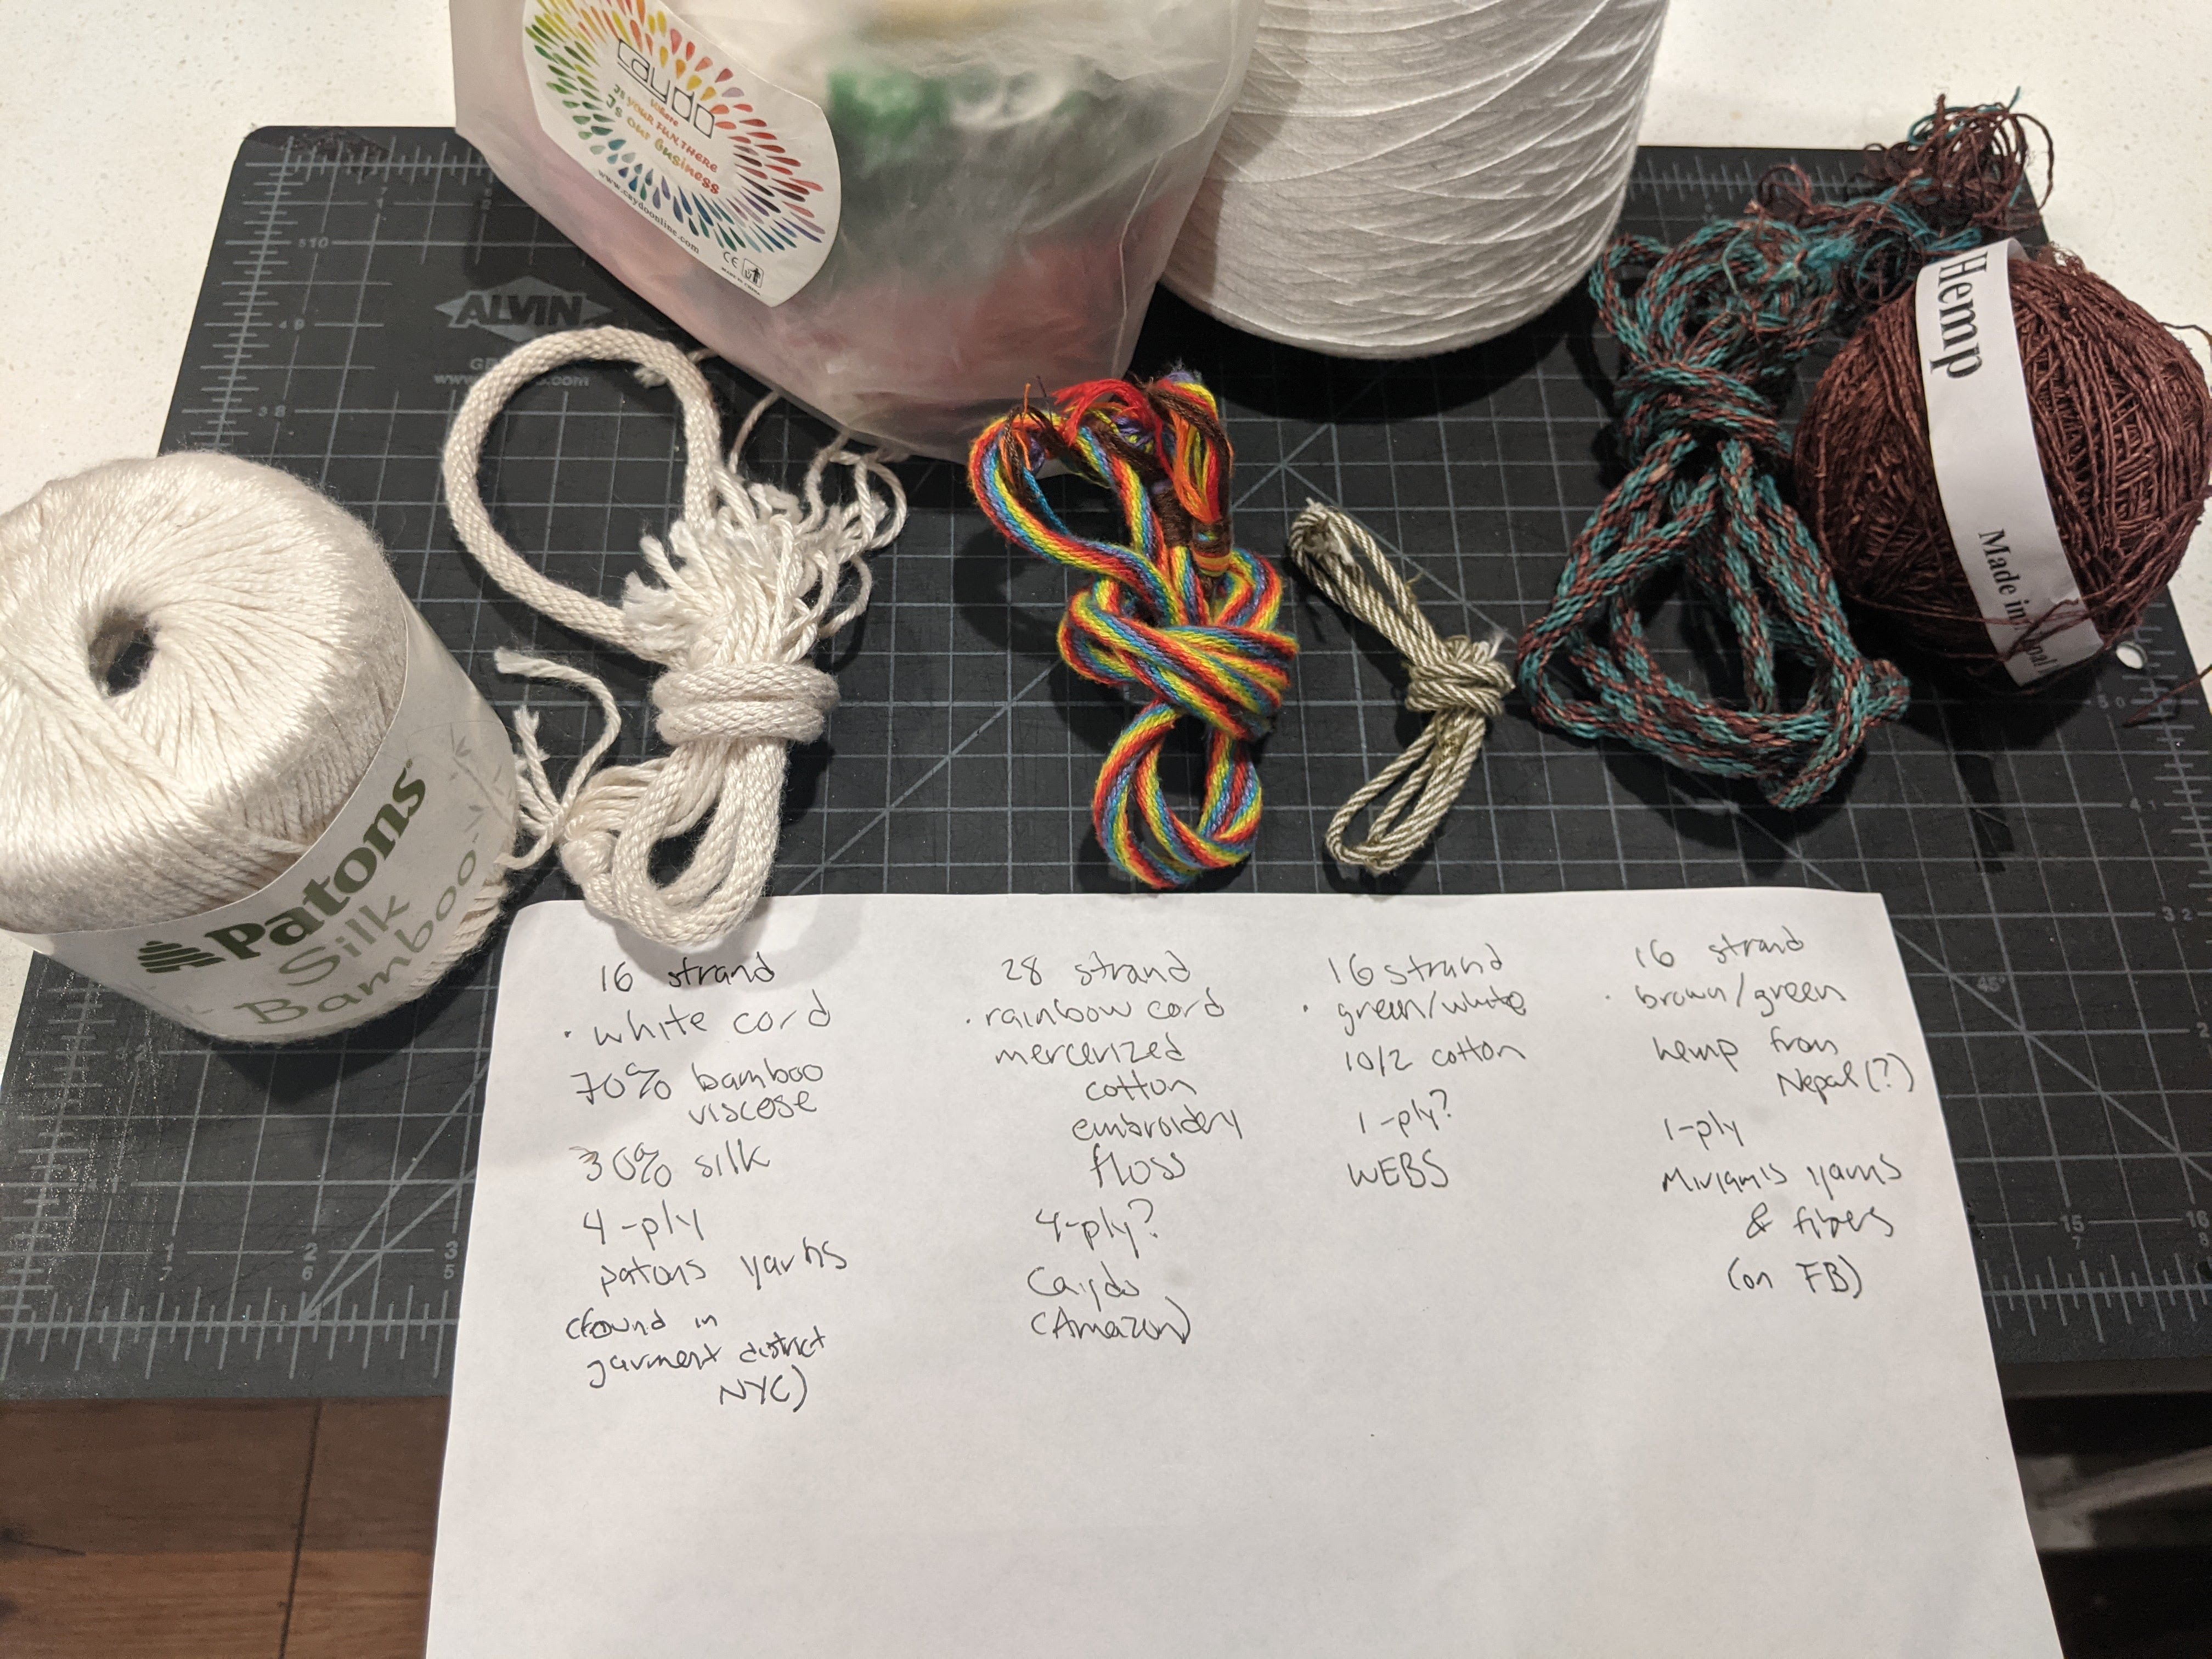 Comparison of four kumihimo braids, with handwritten descriptions.